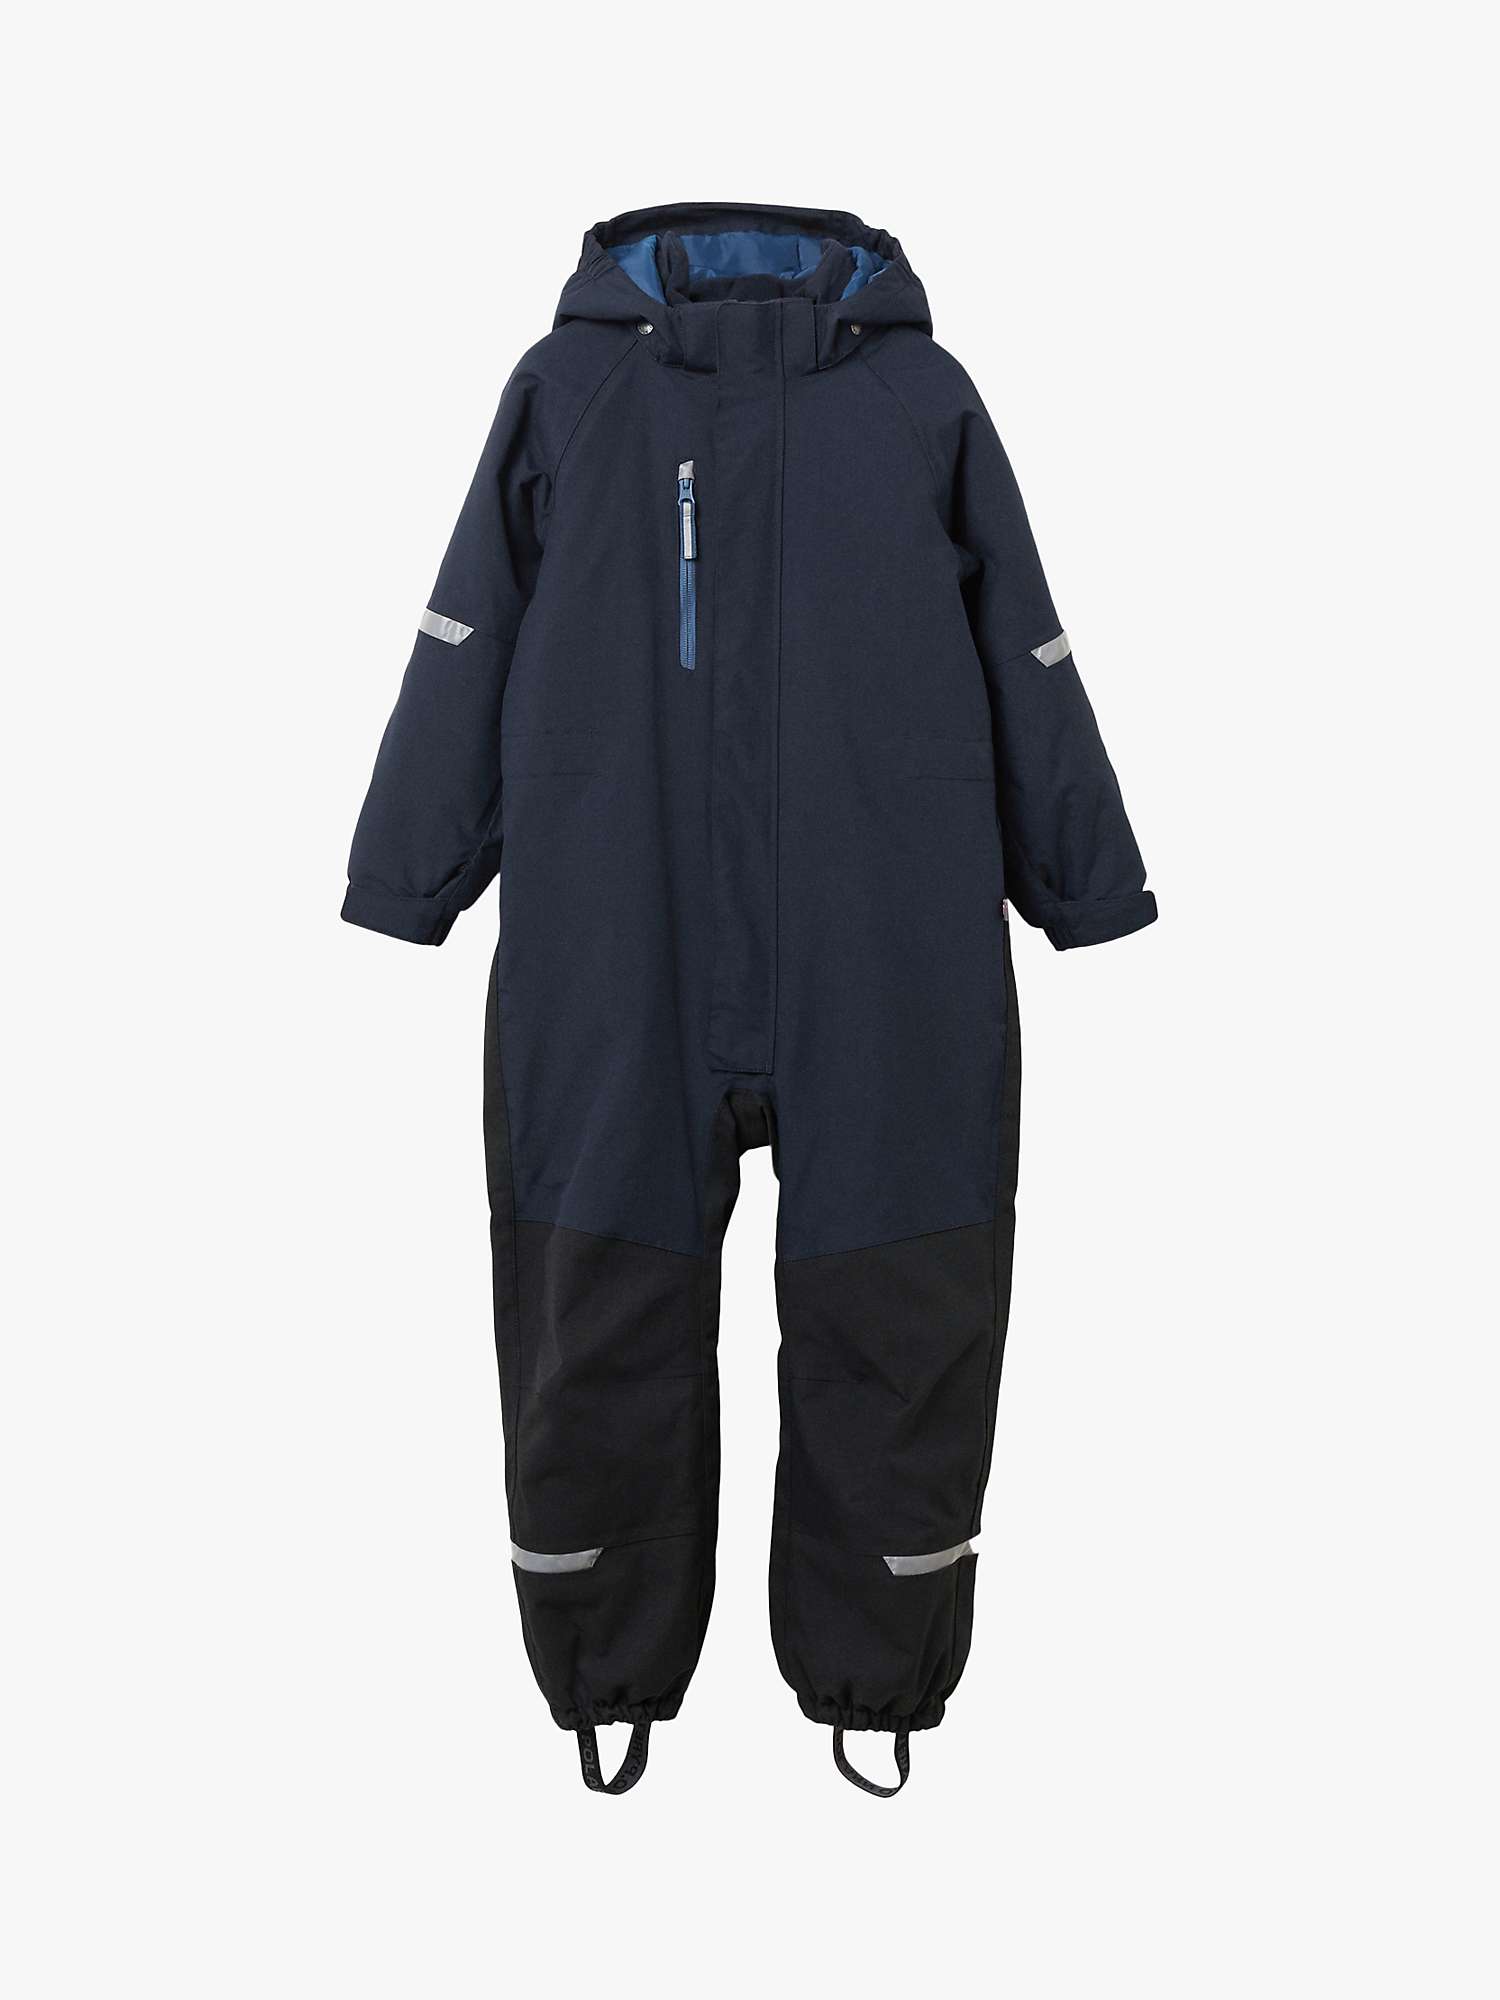 Buy Polarn O. Pyret Kids' Waterproof Lined Hooded Overall Online at johnlewis.com